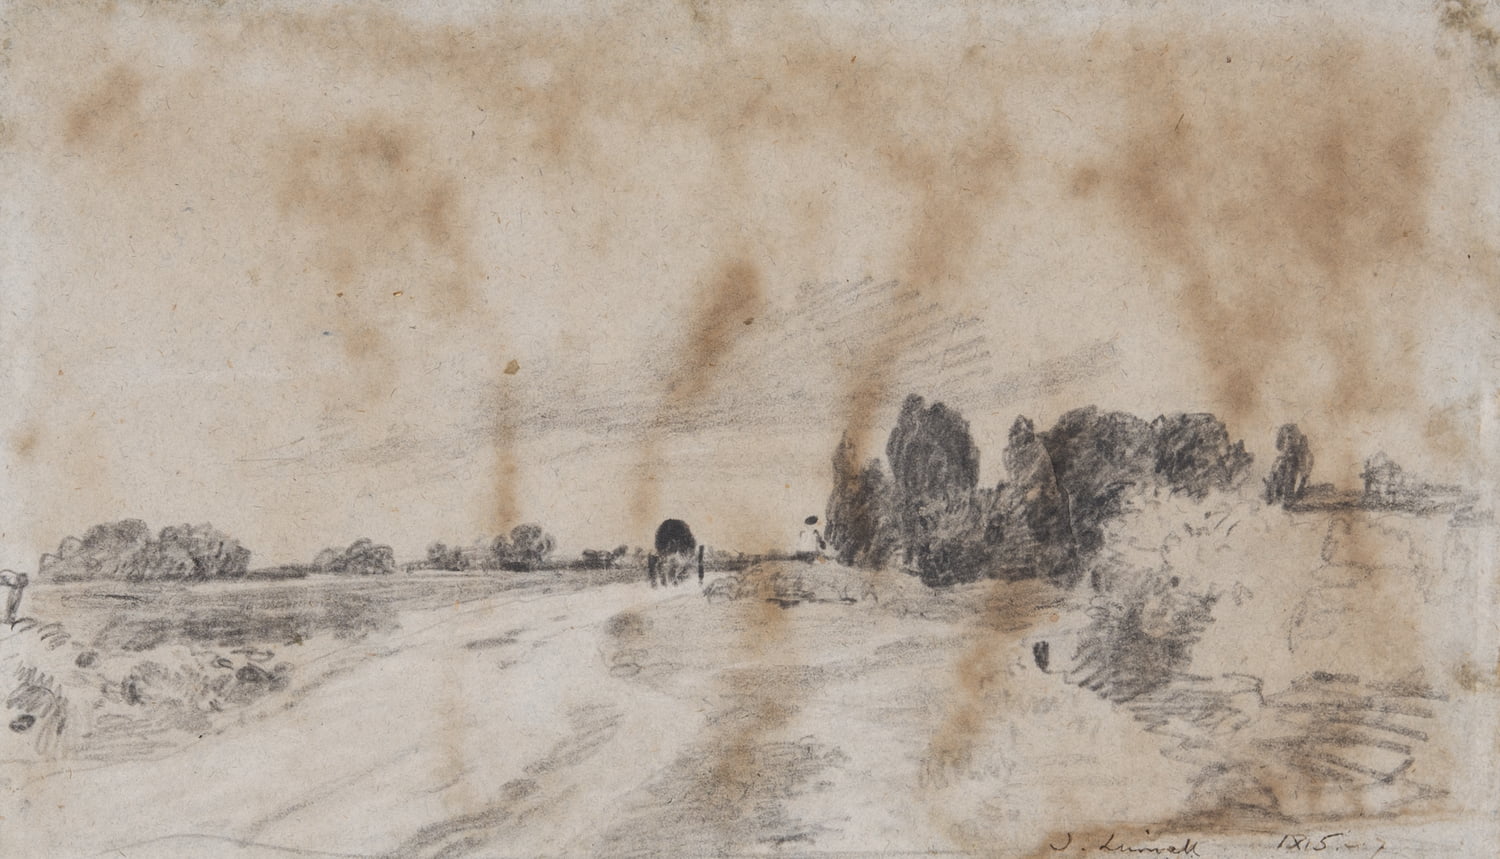 Open landscape with a wagon on a road